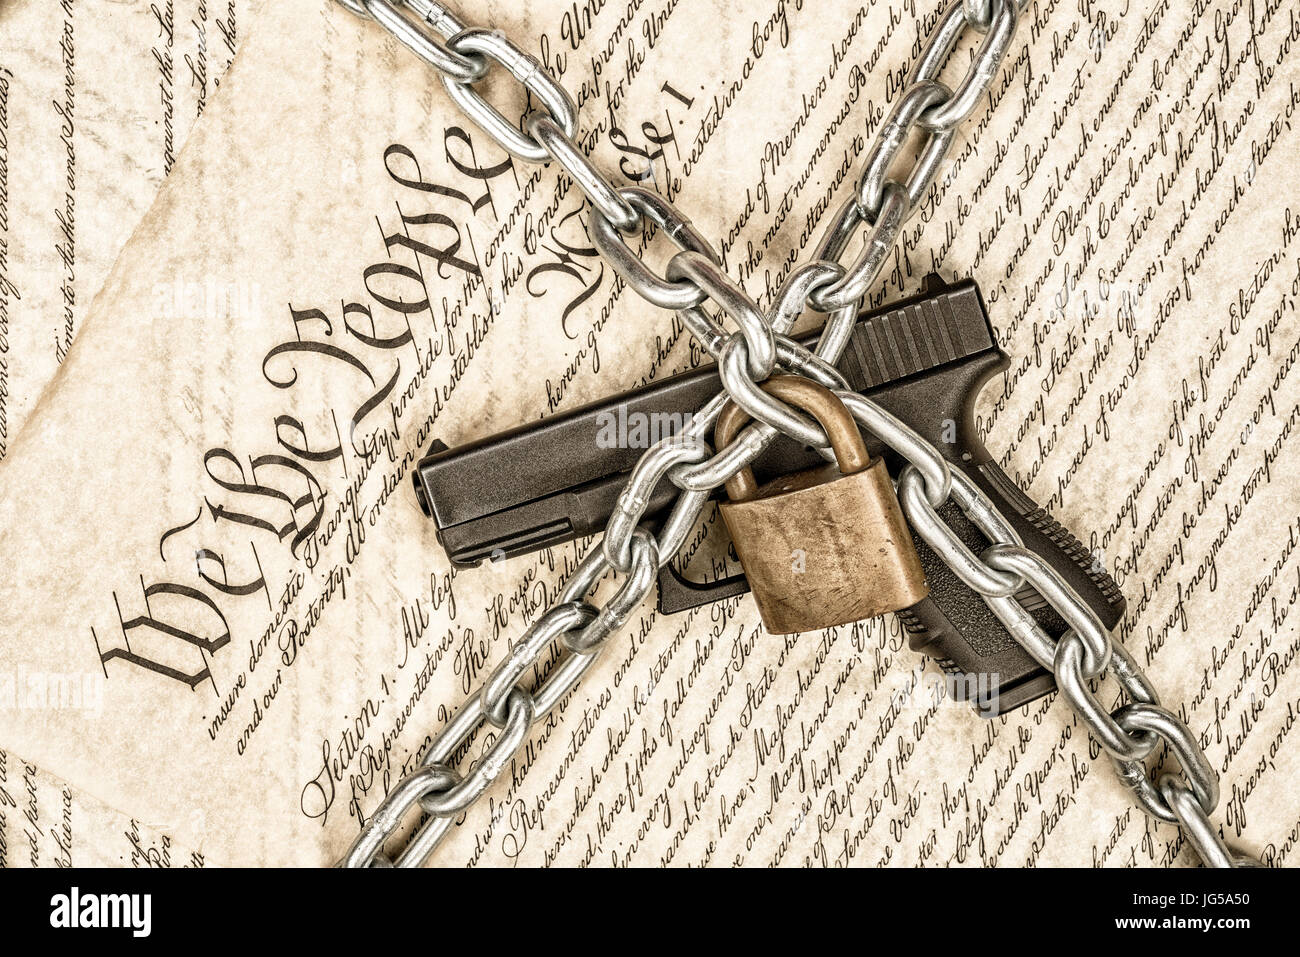 A locked handgun symbolizing gun rights while framed against the United States constitution. Stock Photo